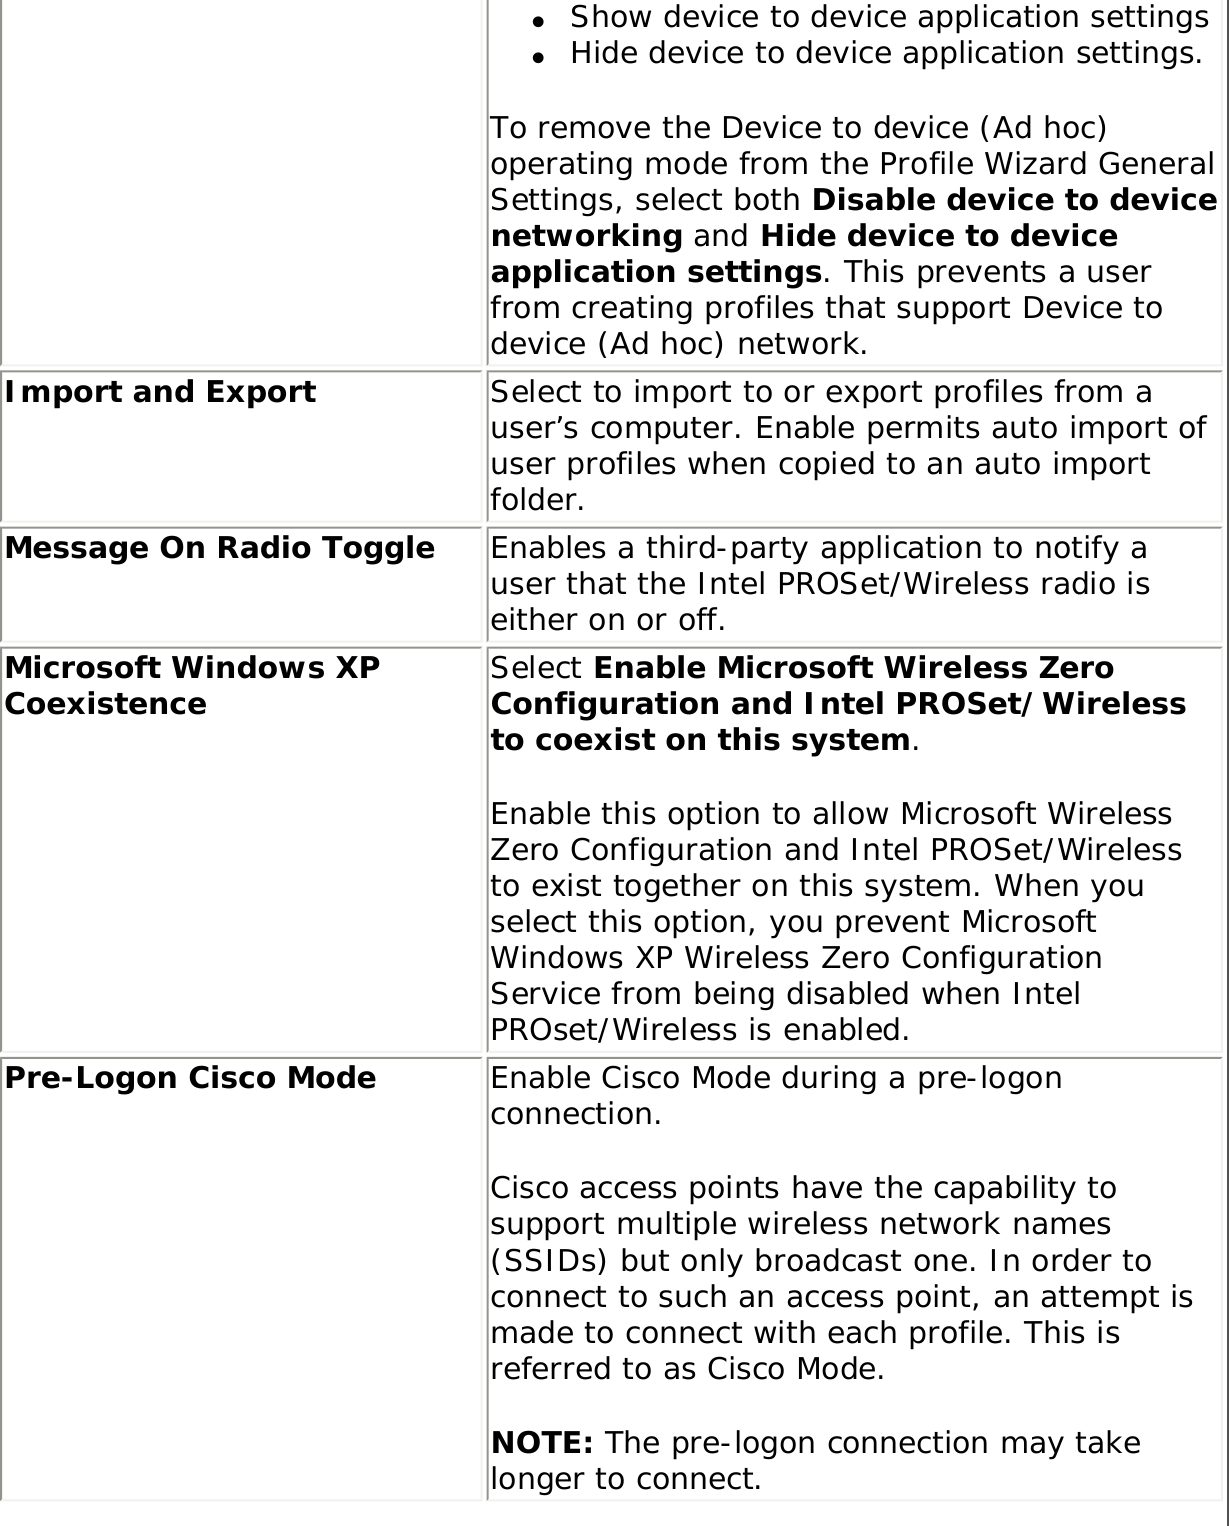 ●     Show device to device application settings ●     Hide device to device application settings.To remove the Device to device (Ad hoc) operating mode from the Profile Wizard General Settings, select both Disable device to device networking and Hide device to device application settings. This prevents a user from creating profiles that support Device to device (Ad hoc) network. Import and Export  Select to import to or export profiles from a user’s computer. Enable permits auto import of user profiles when copied to an auto import folder. Message On Radio Toggle  Enables a third-party application to notify a user that the Intel PROSet/Wireless radio is either on or off. Microsoft Windows XP Coexistence Select Enable Microsoft Wireless Zero Configuration and Intel PROSet/Wireless to coexist on this system. Enable this option to allow Microsoft Wireless Zero Configuration and Intel PROSet/Wireless to exist together on this system. When you select this option, you prevent Microsoft Windows XP Wireless Zero Configuration Service from being disabled when Intel PROset/Wireless is enabled.Pre-Logon Cisco Mode  Enable Cisco Mode during a pre-logon connection. Cisco access points have the capability to support multiple wireless network names (SSIDs) but only broadcast one. In order to connect to such an access point, an attempt is made to connect with each profile. This is referred to as Cisco Mode. NOTE: The pre-logon connection may take longer to connect.